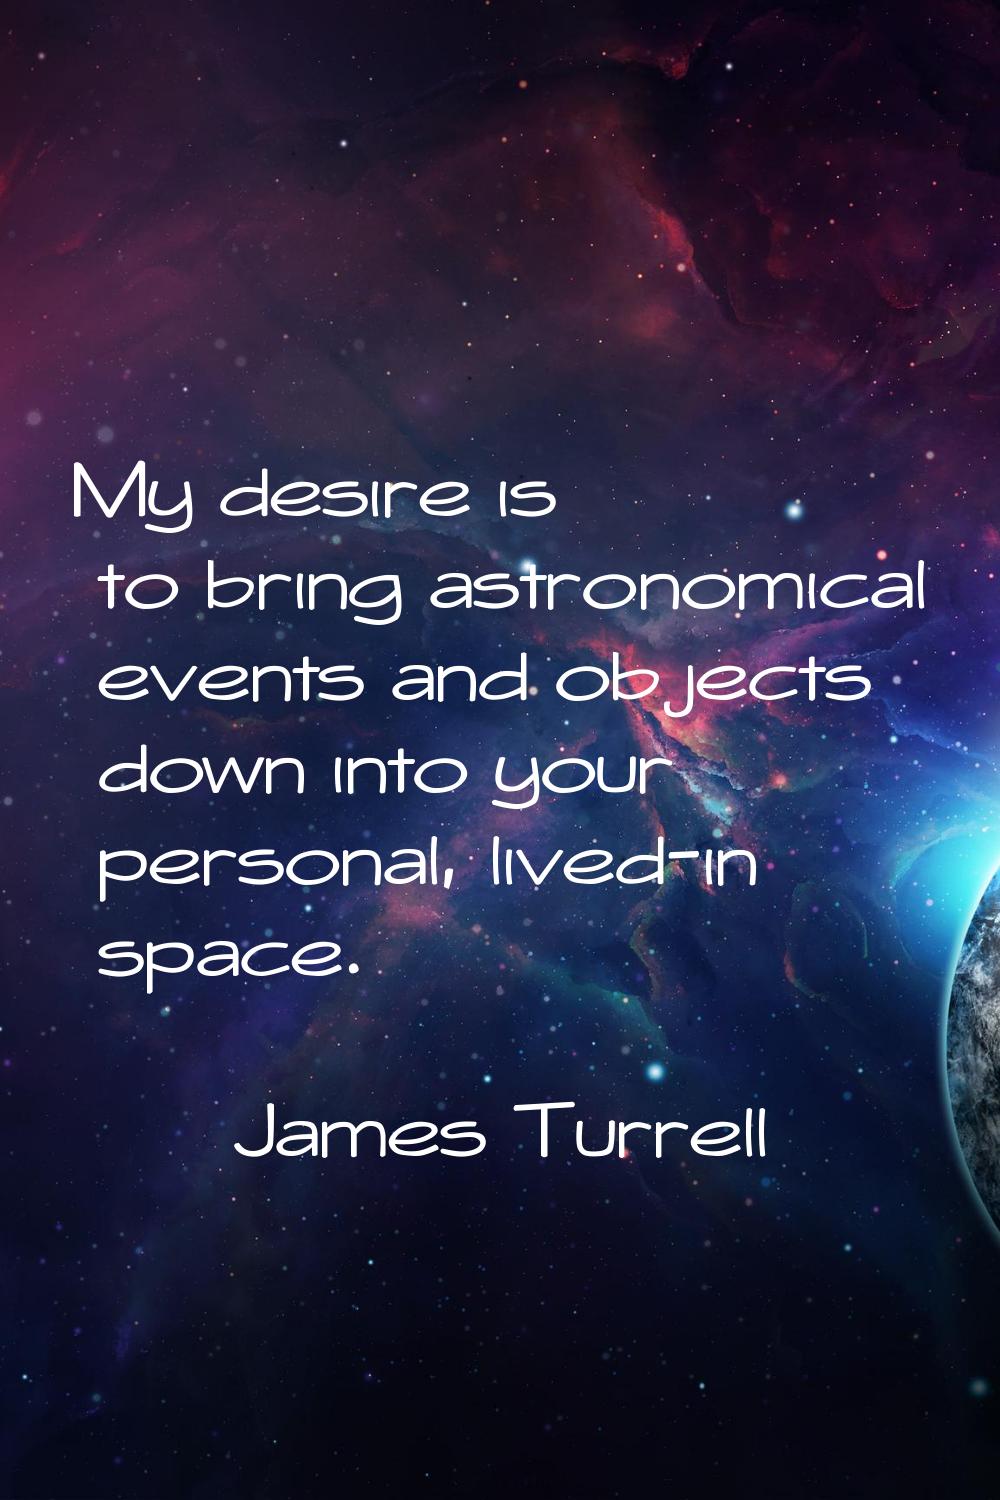 My desire is to bring astronomical events and objects down into your personal, lived-in space.